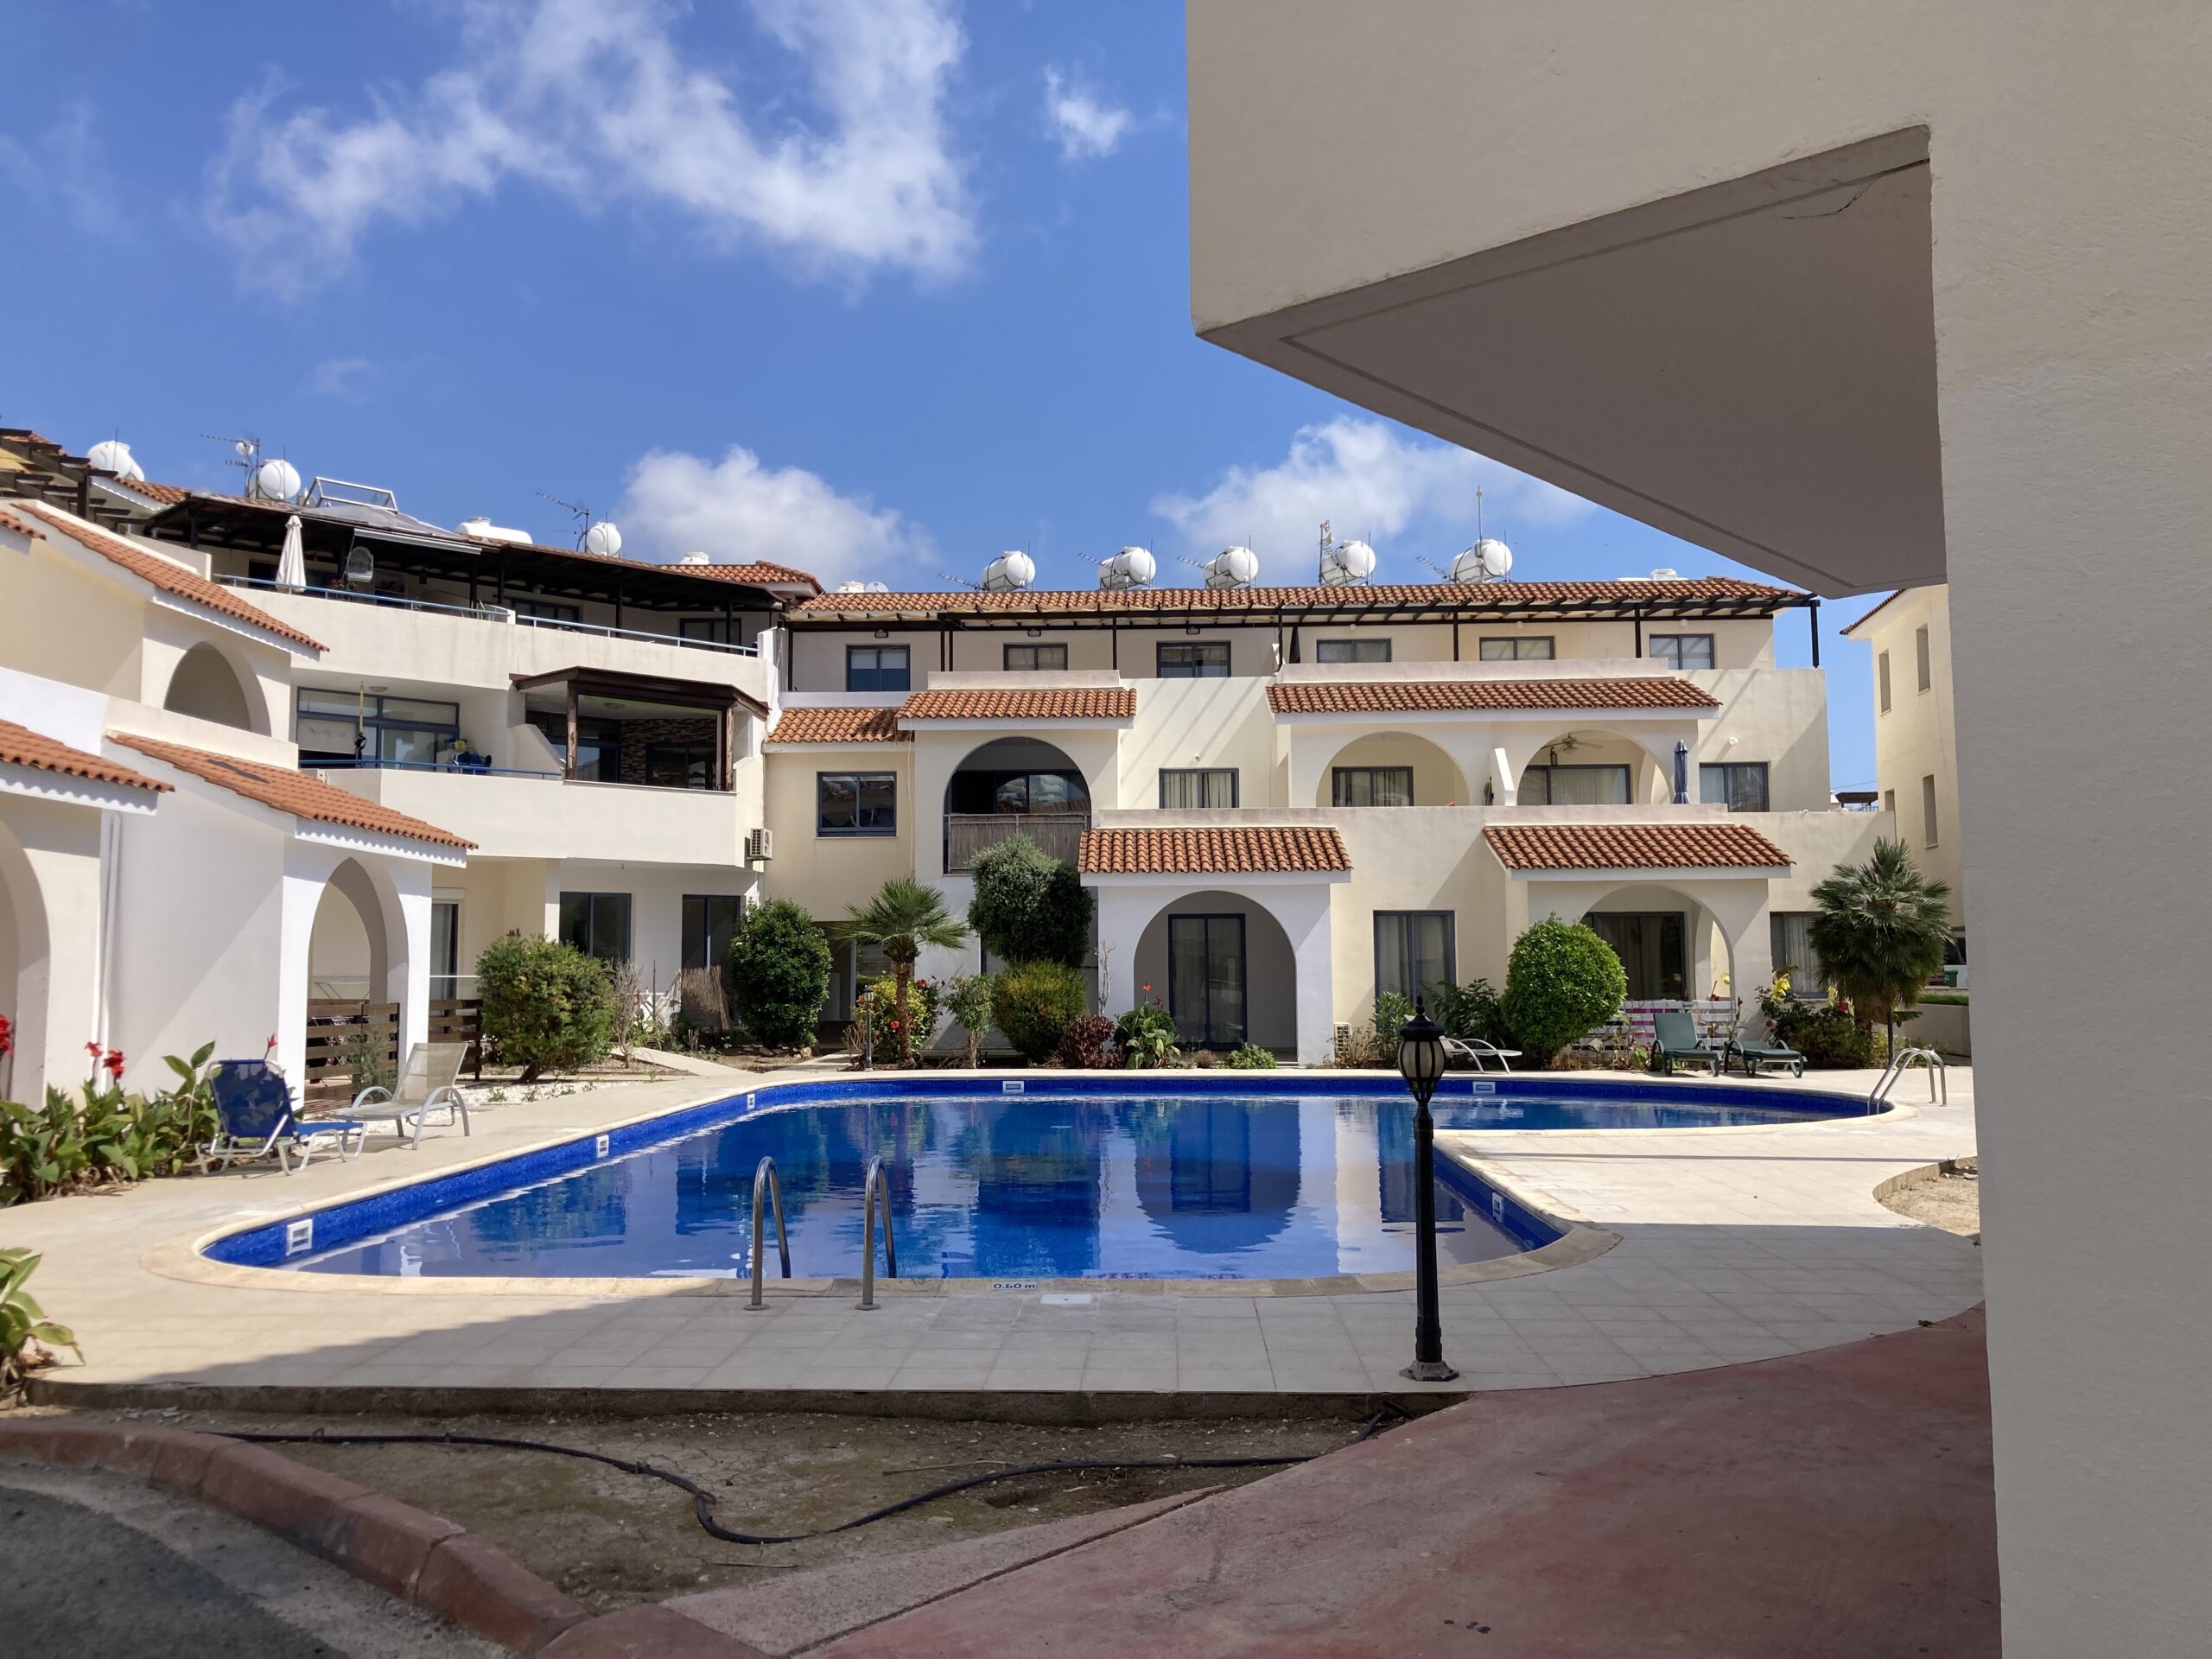 1 Bedroom Residential Property for Rent in Paphos